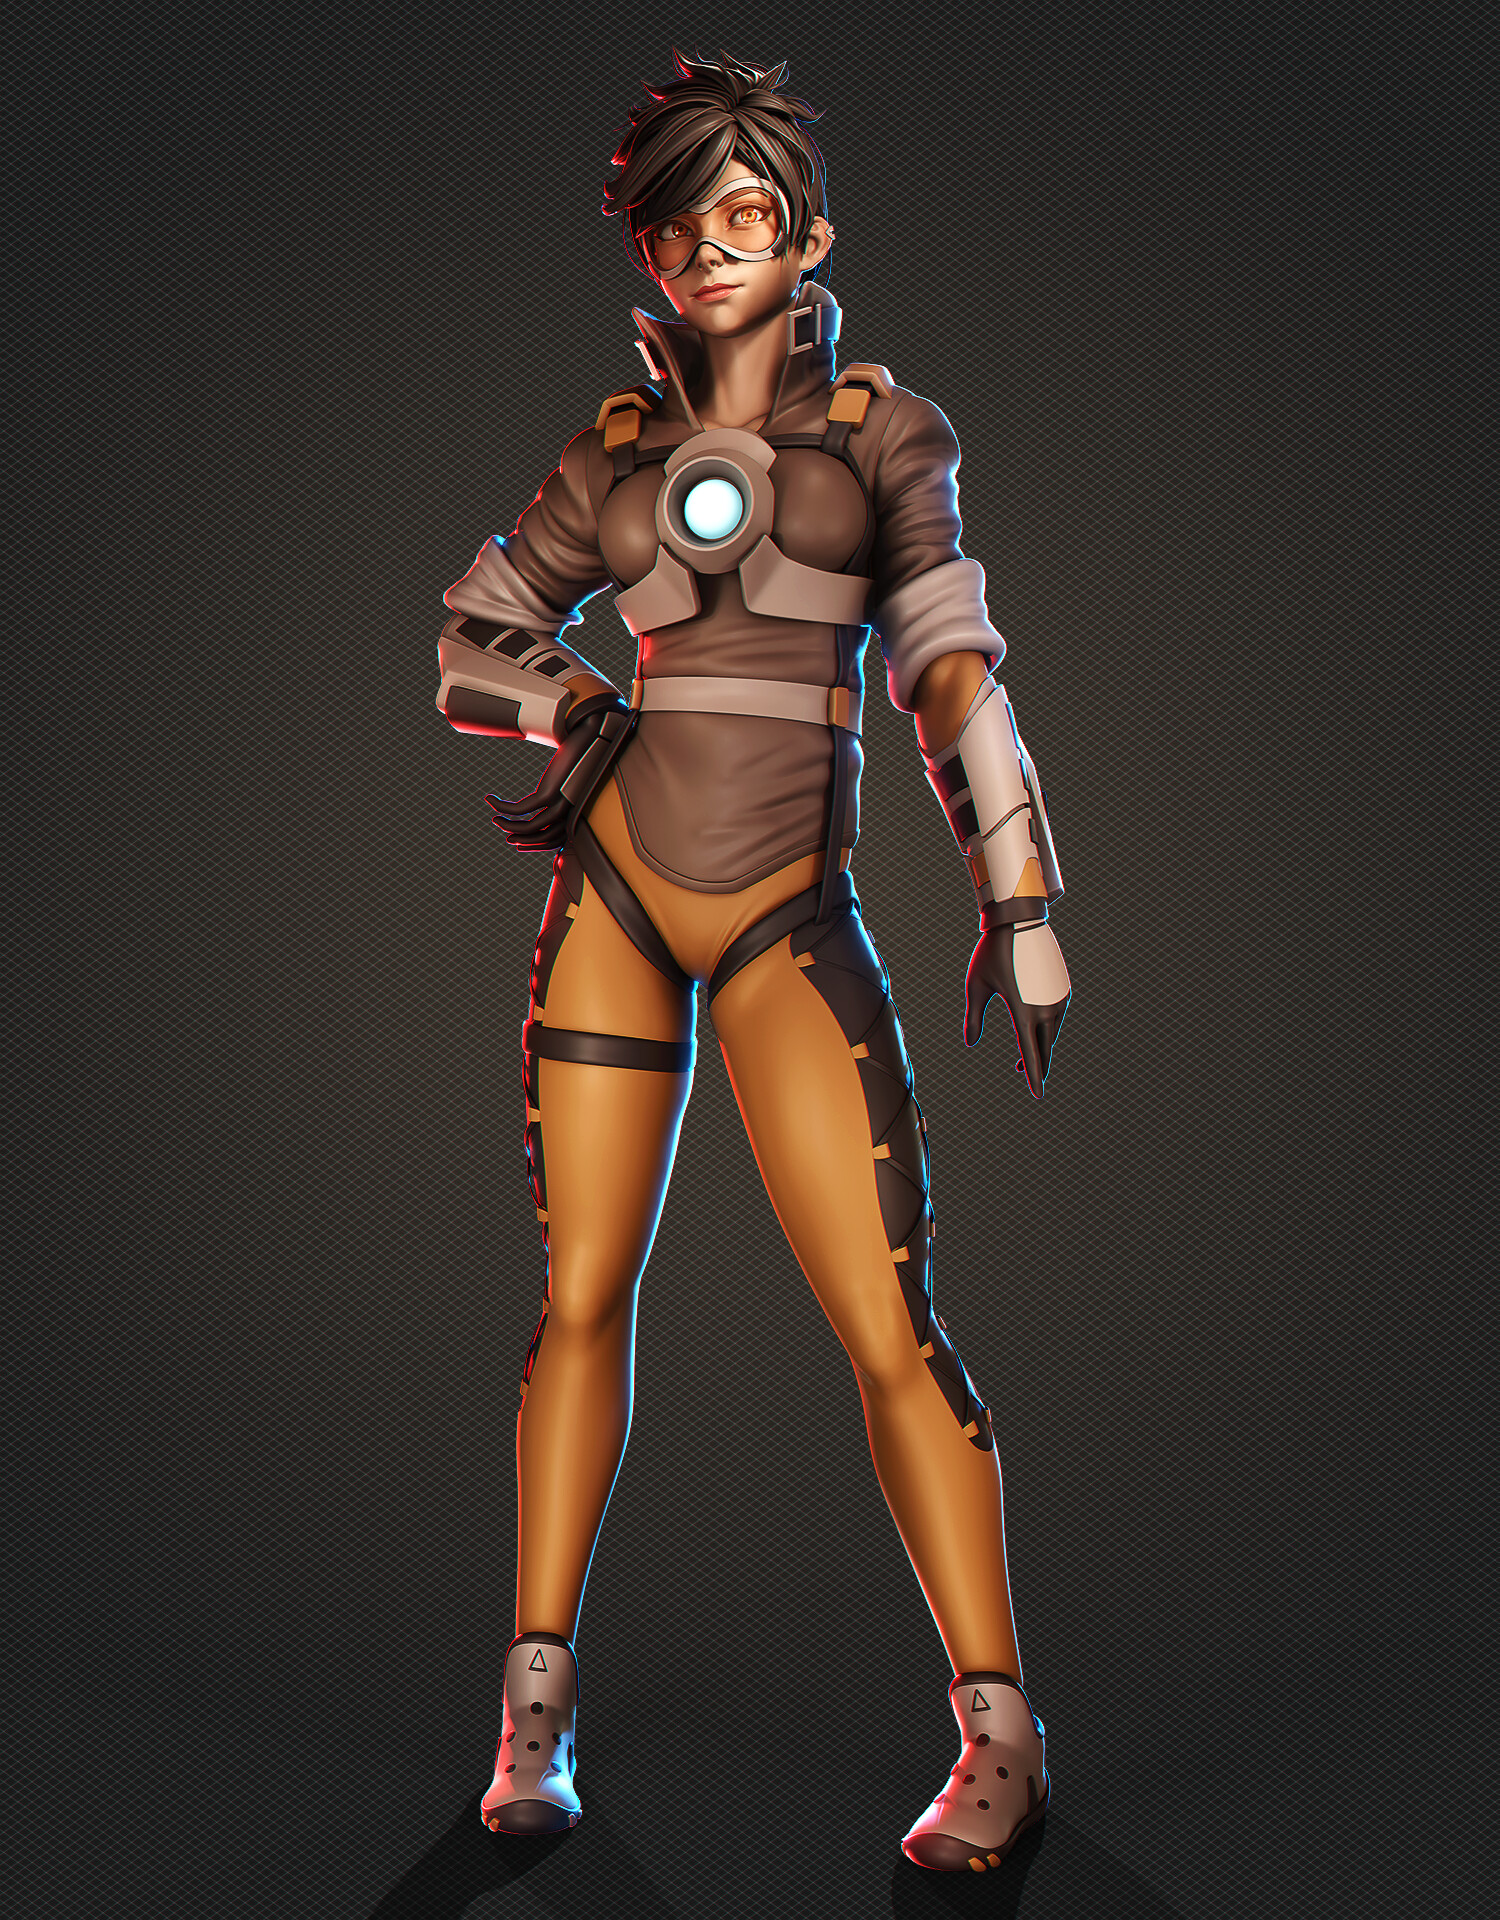 Tracer (Overwatch fanart) - Finished Projects - Blender Artists Community